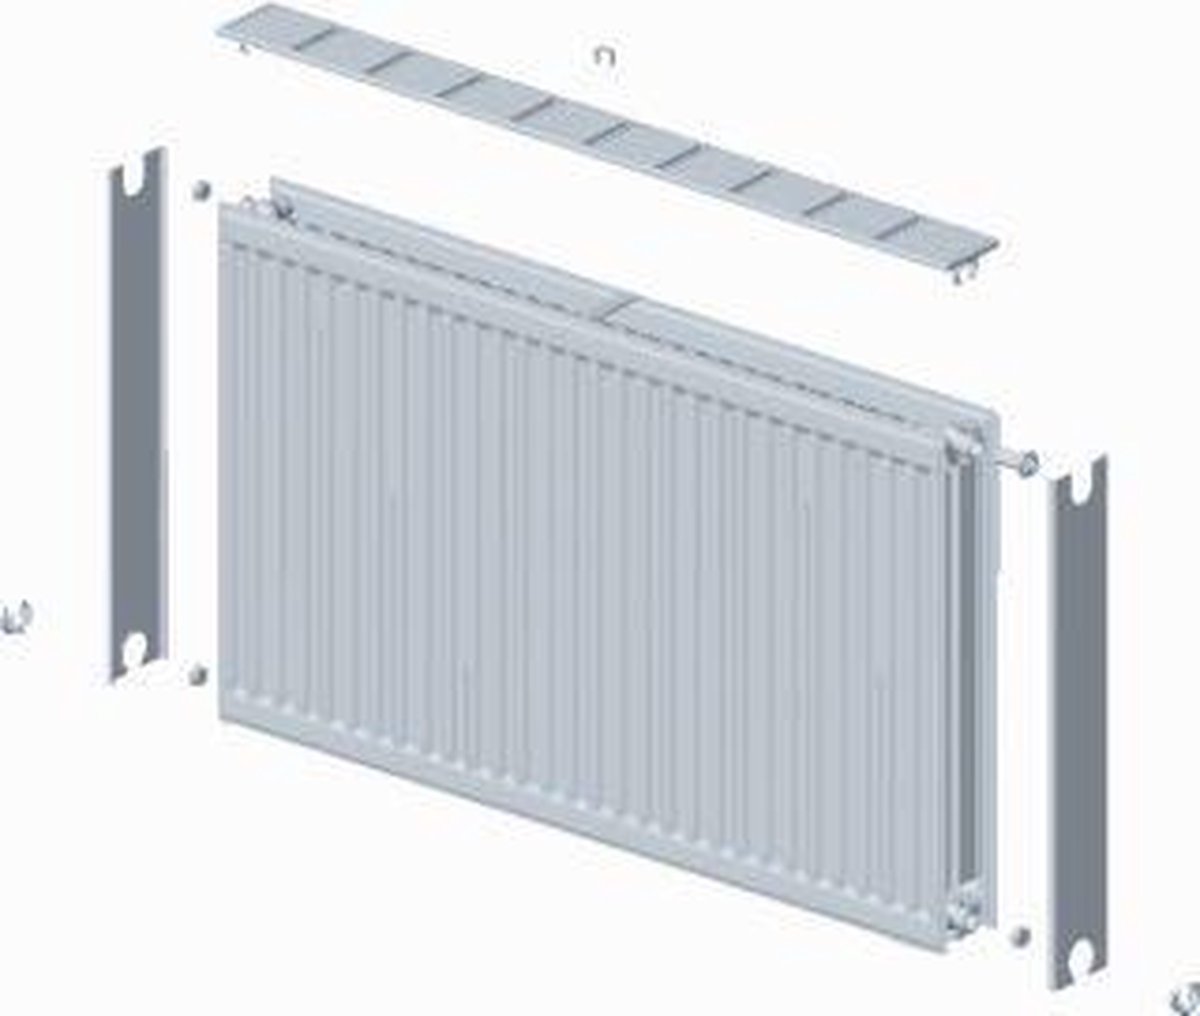 Stelrad paneelradiator Novello, staal, wit, (hxlxd) 300x2200x100mm, 22